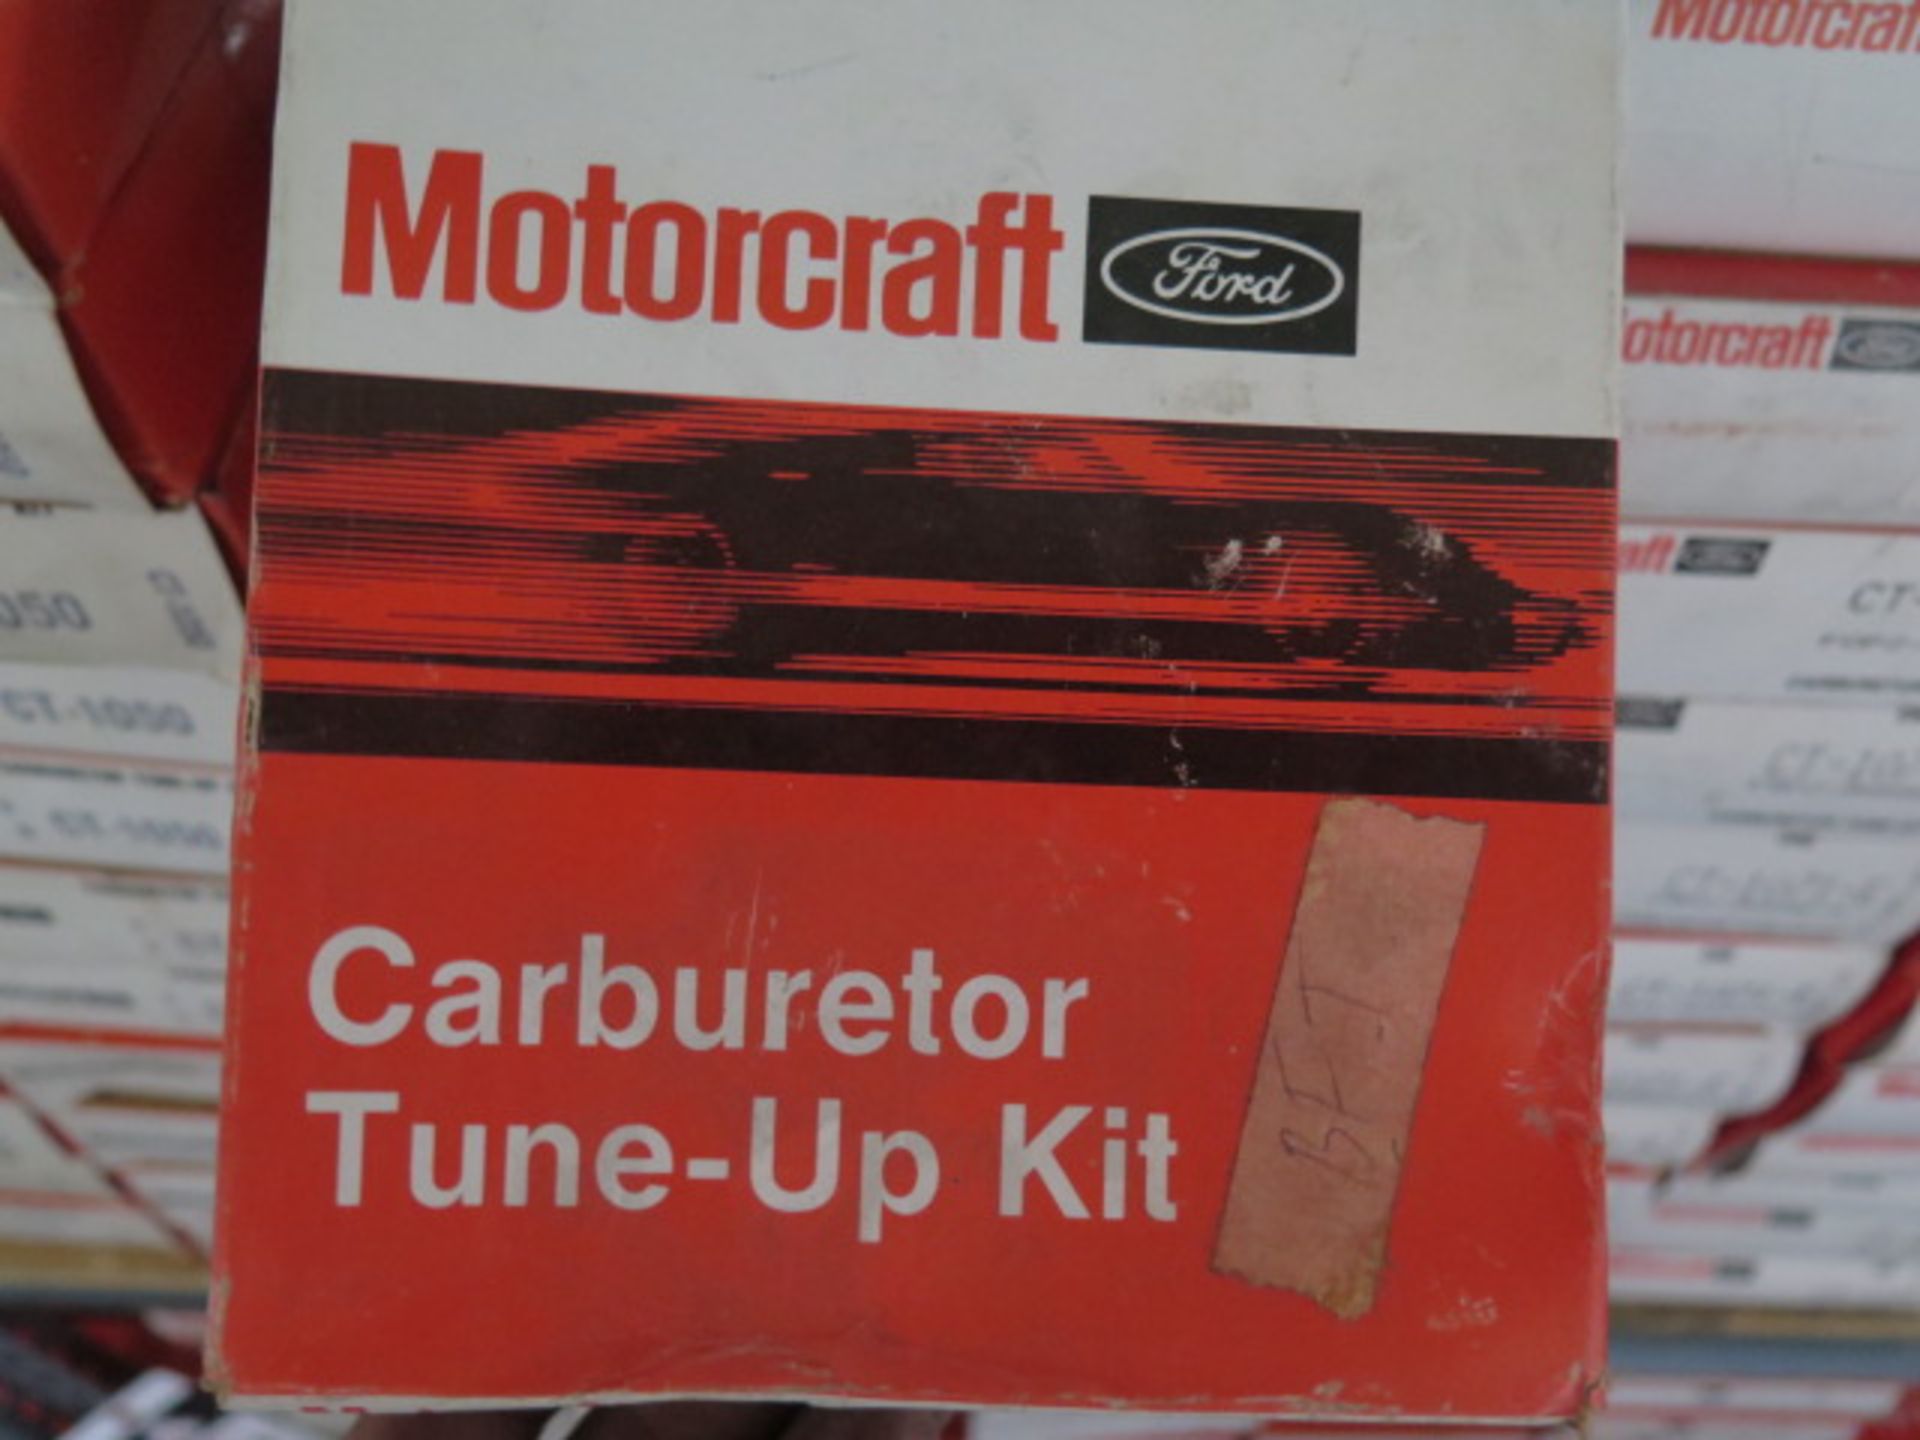 Motorcraft Carbureter Tune Up Kits (163 - Check PICs for Part Numbers) (SOLD AS-IS - NO WARRANTY) - Image 10 of 10